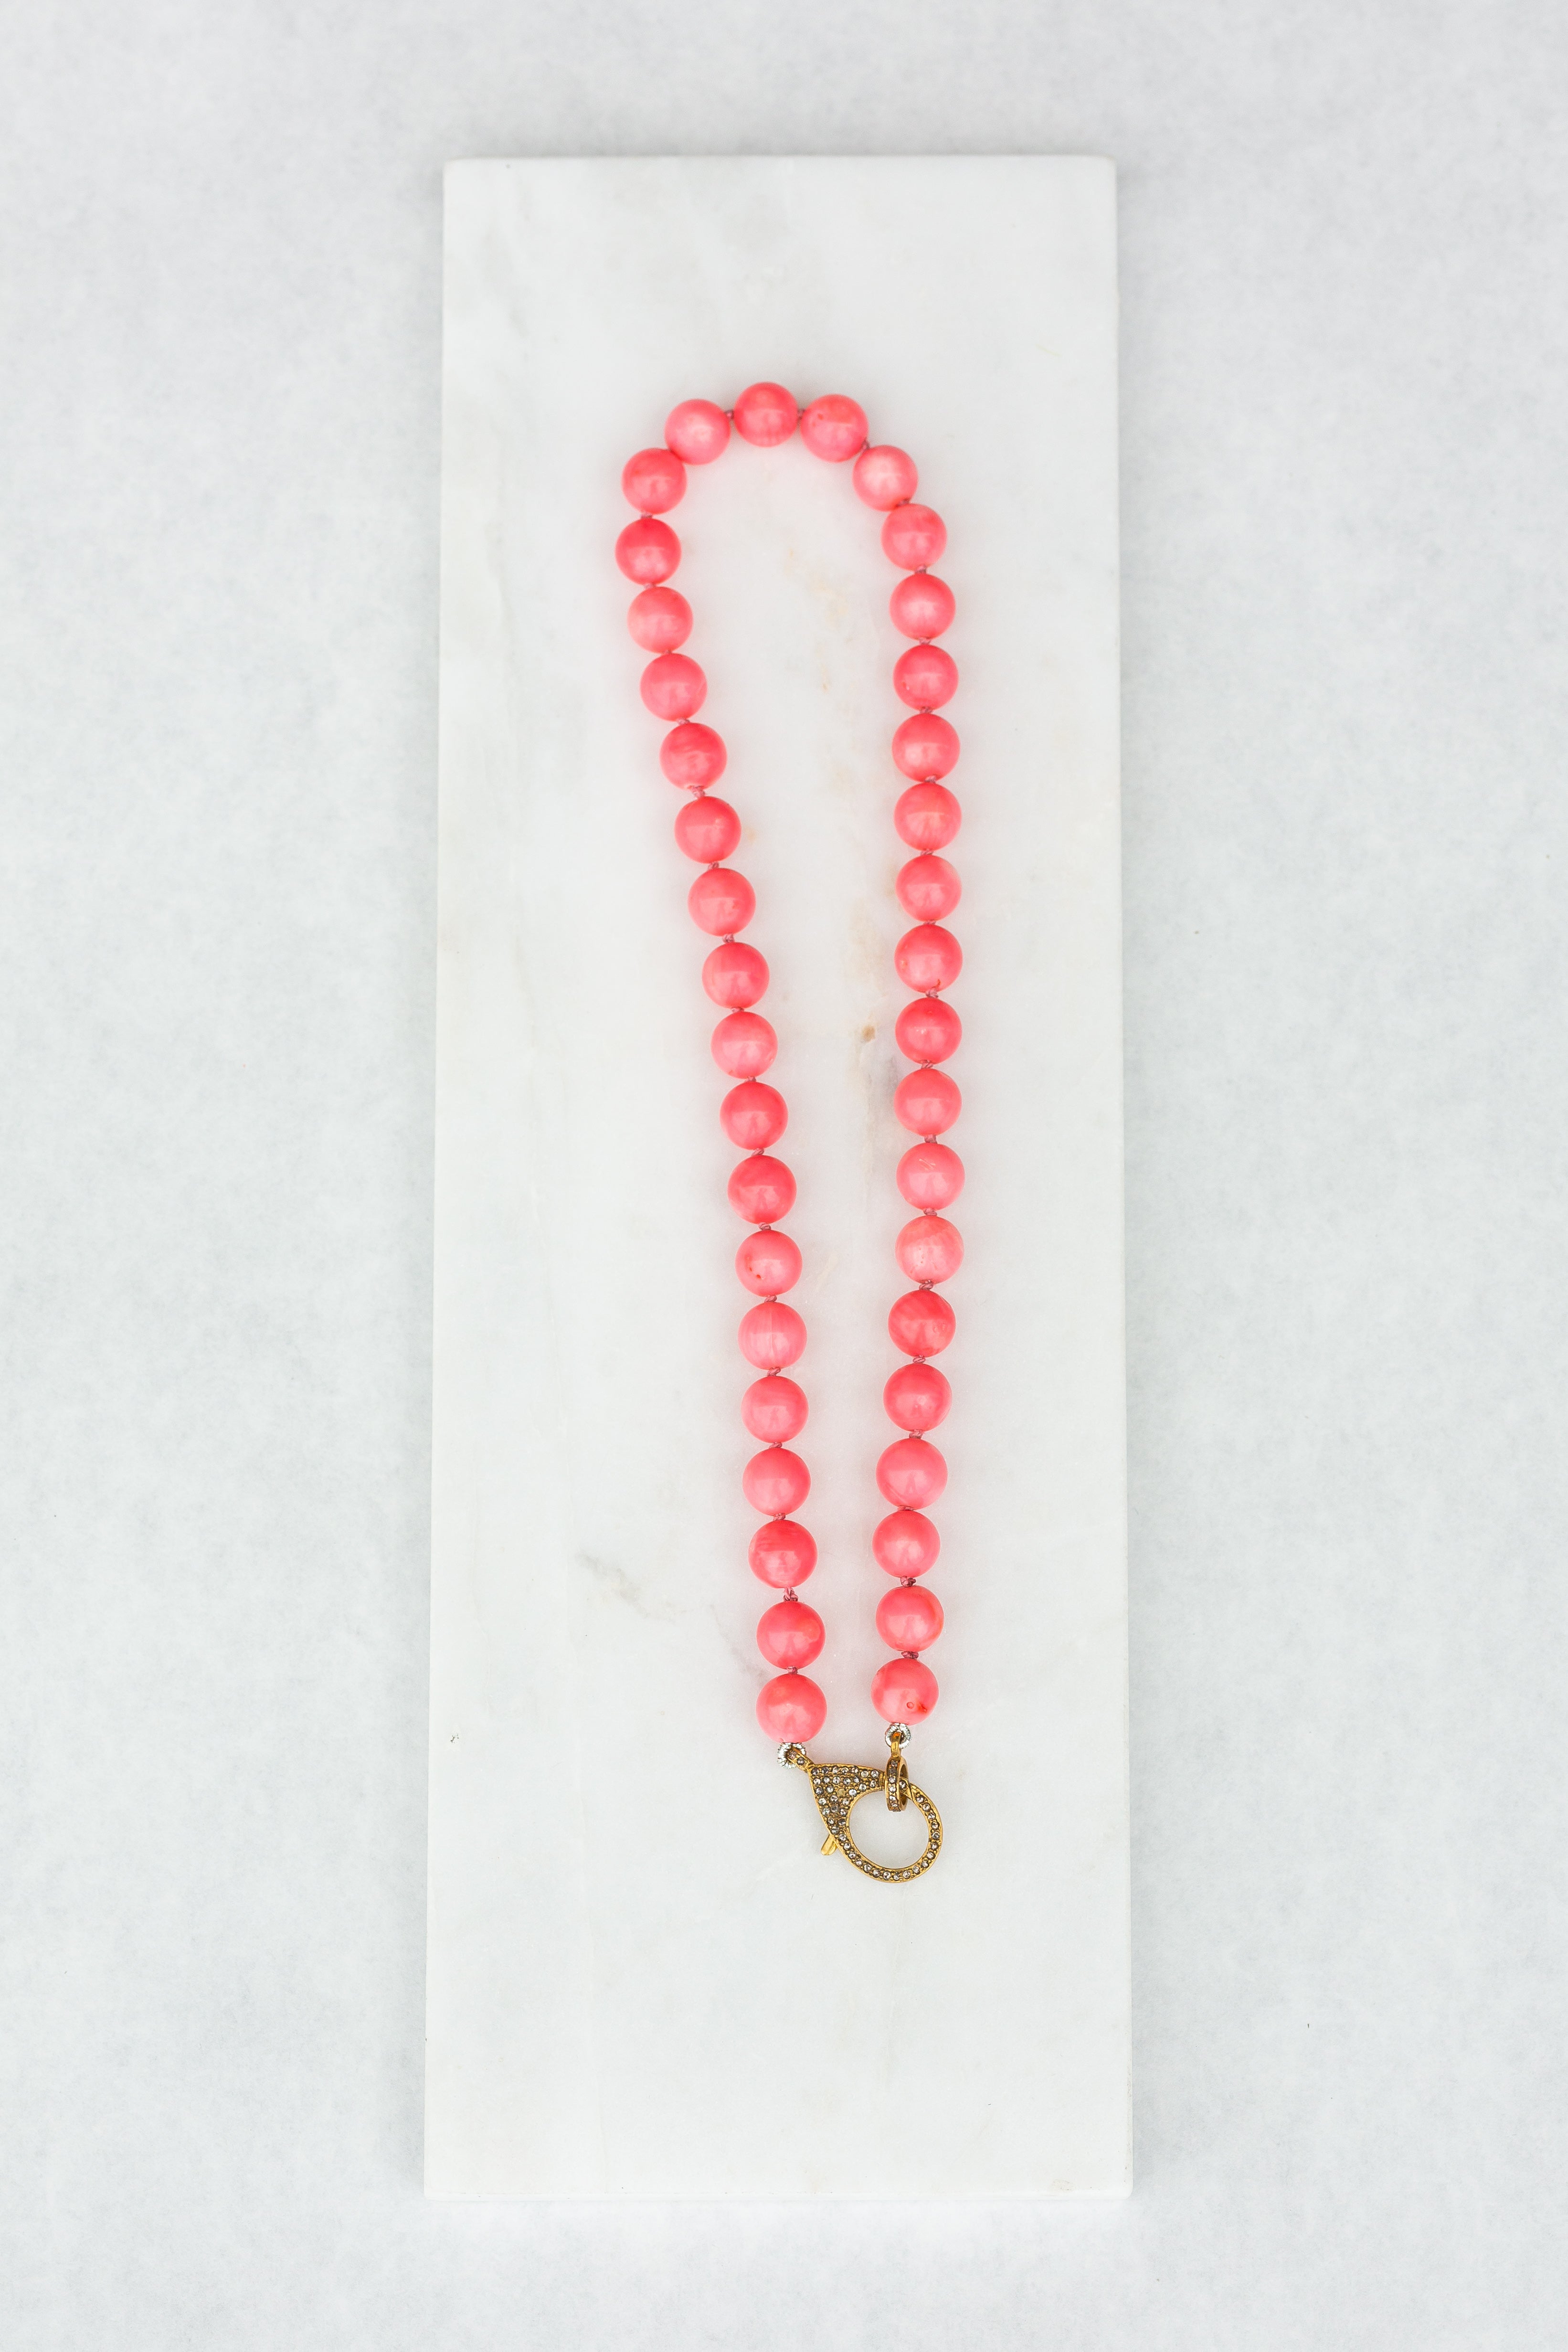 c108-17" bead Pink Coral